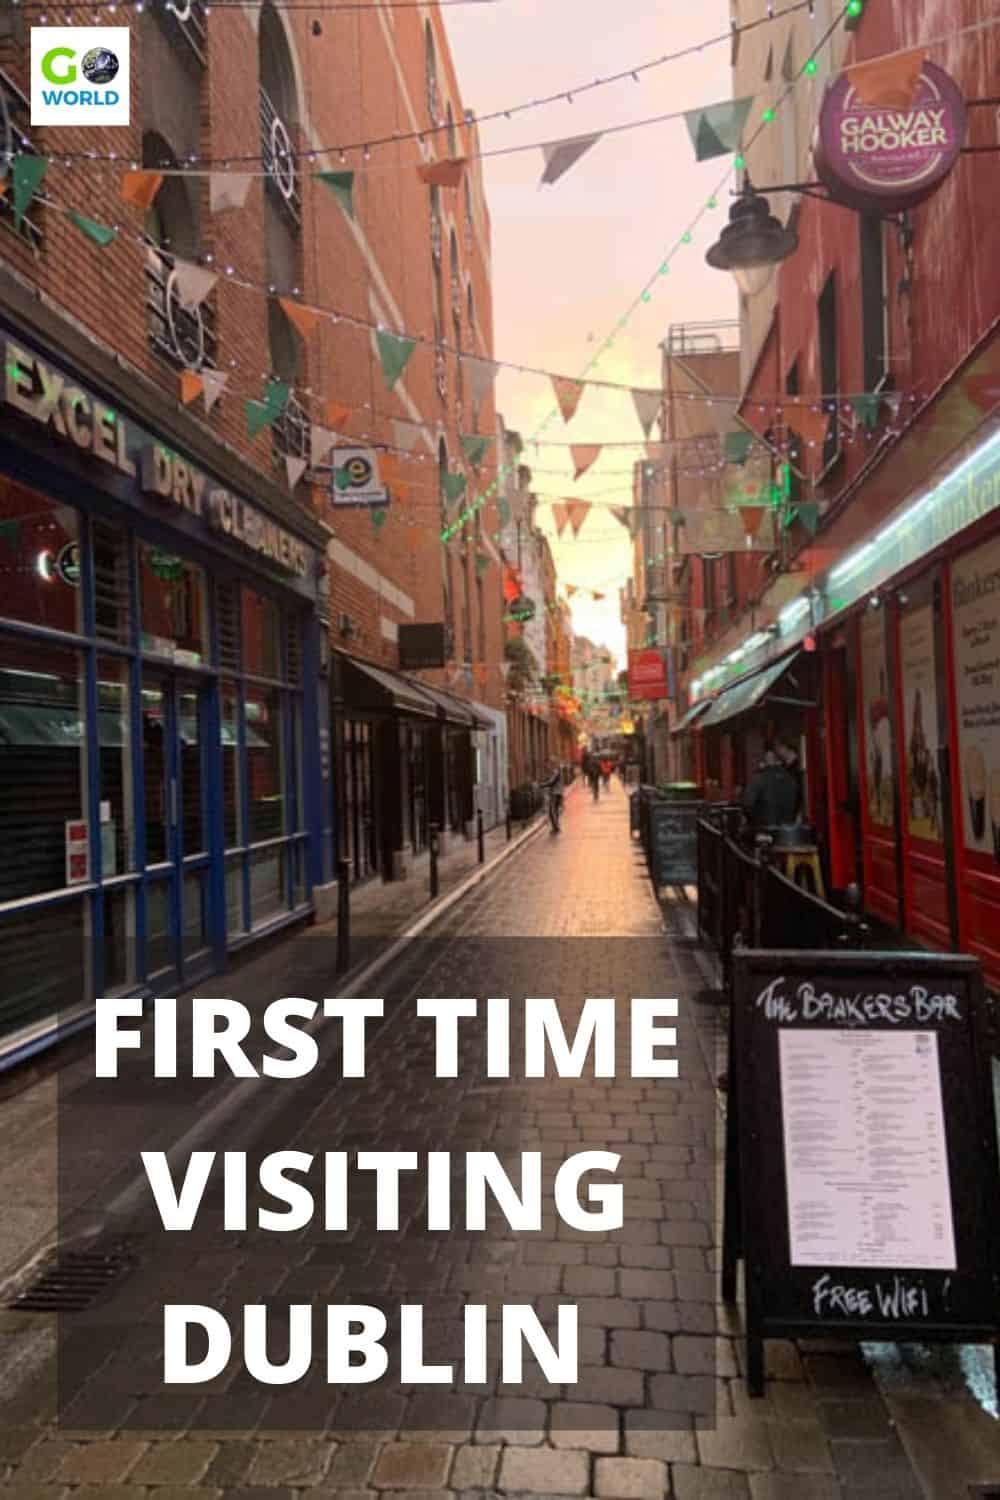 Planning on visiting Dublin, Ireland for the first time? Check out these must-see sights from an excited first time traveler to Dublin. #Travelireland #Dublinsights #WhattoseeinDublin